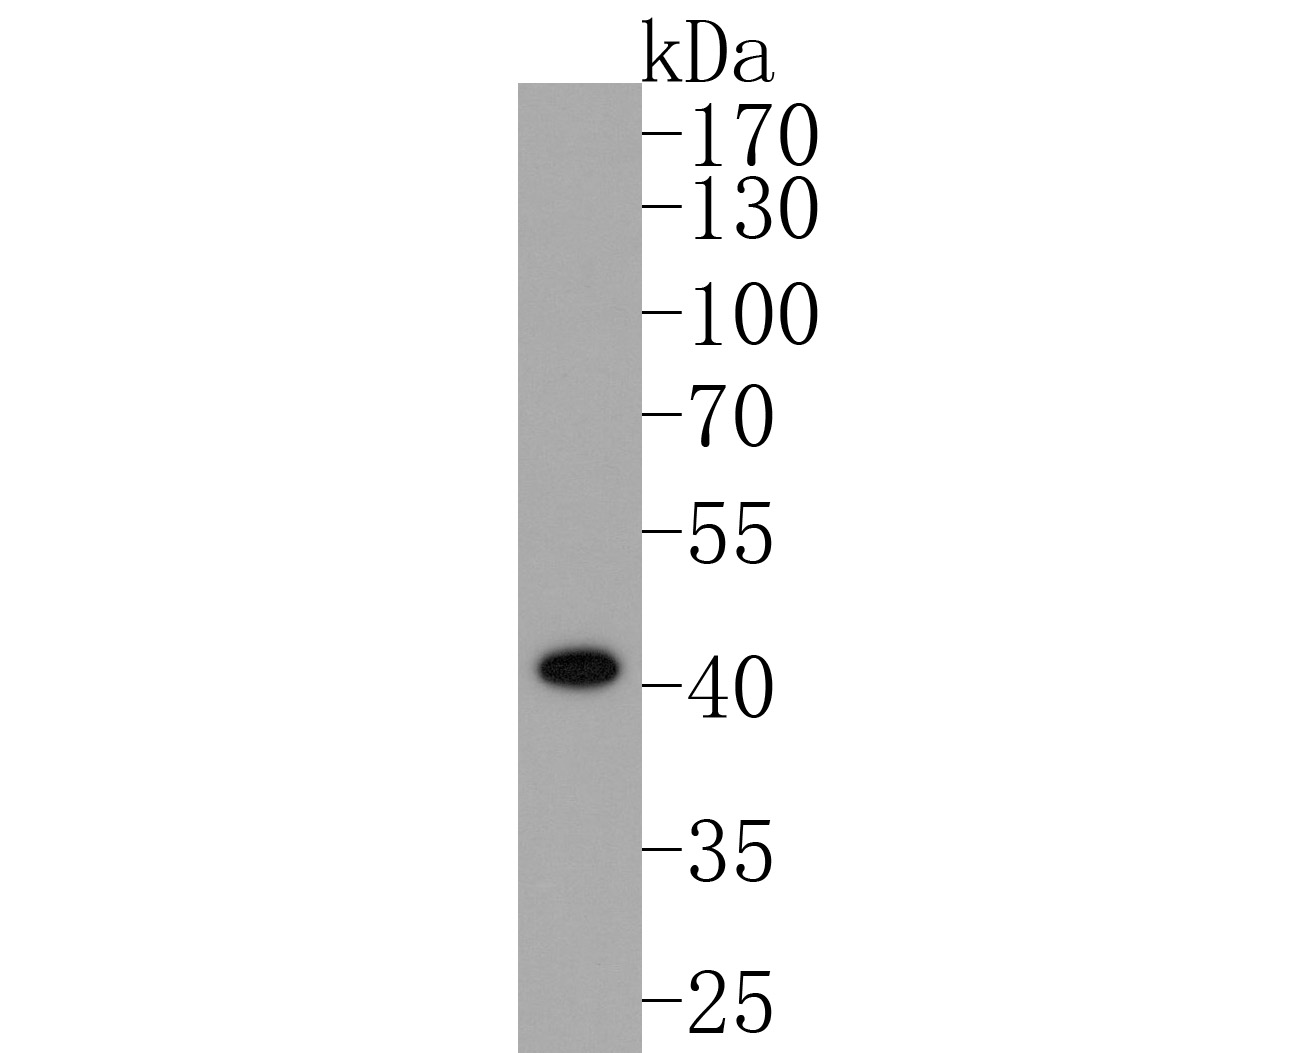 Western blot analysis of PDX1 on Hela cell lysates. Proteins were transferred to a PVDF membrane and blocked with 5% BSA in PBS for 1 hour at room temperature. The primary antibody (ET1705-99, 1/500) was used in 5% BSA at room temperature for 2 hours. Goat Anti-Rabbit IgG - HRP Secondary Antibody (HA1001) at 1:200,000 dilution was used for 1 hour at room temperature.